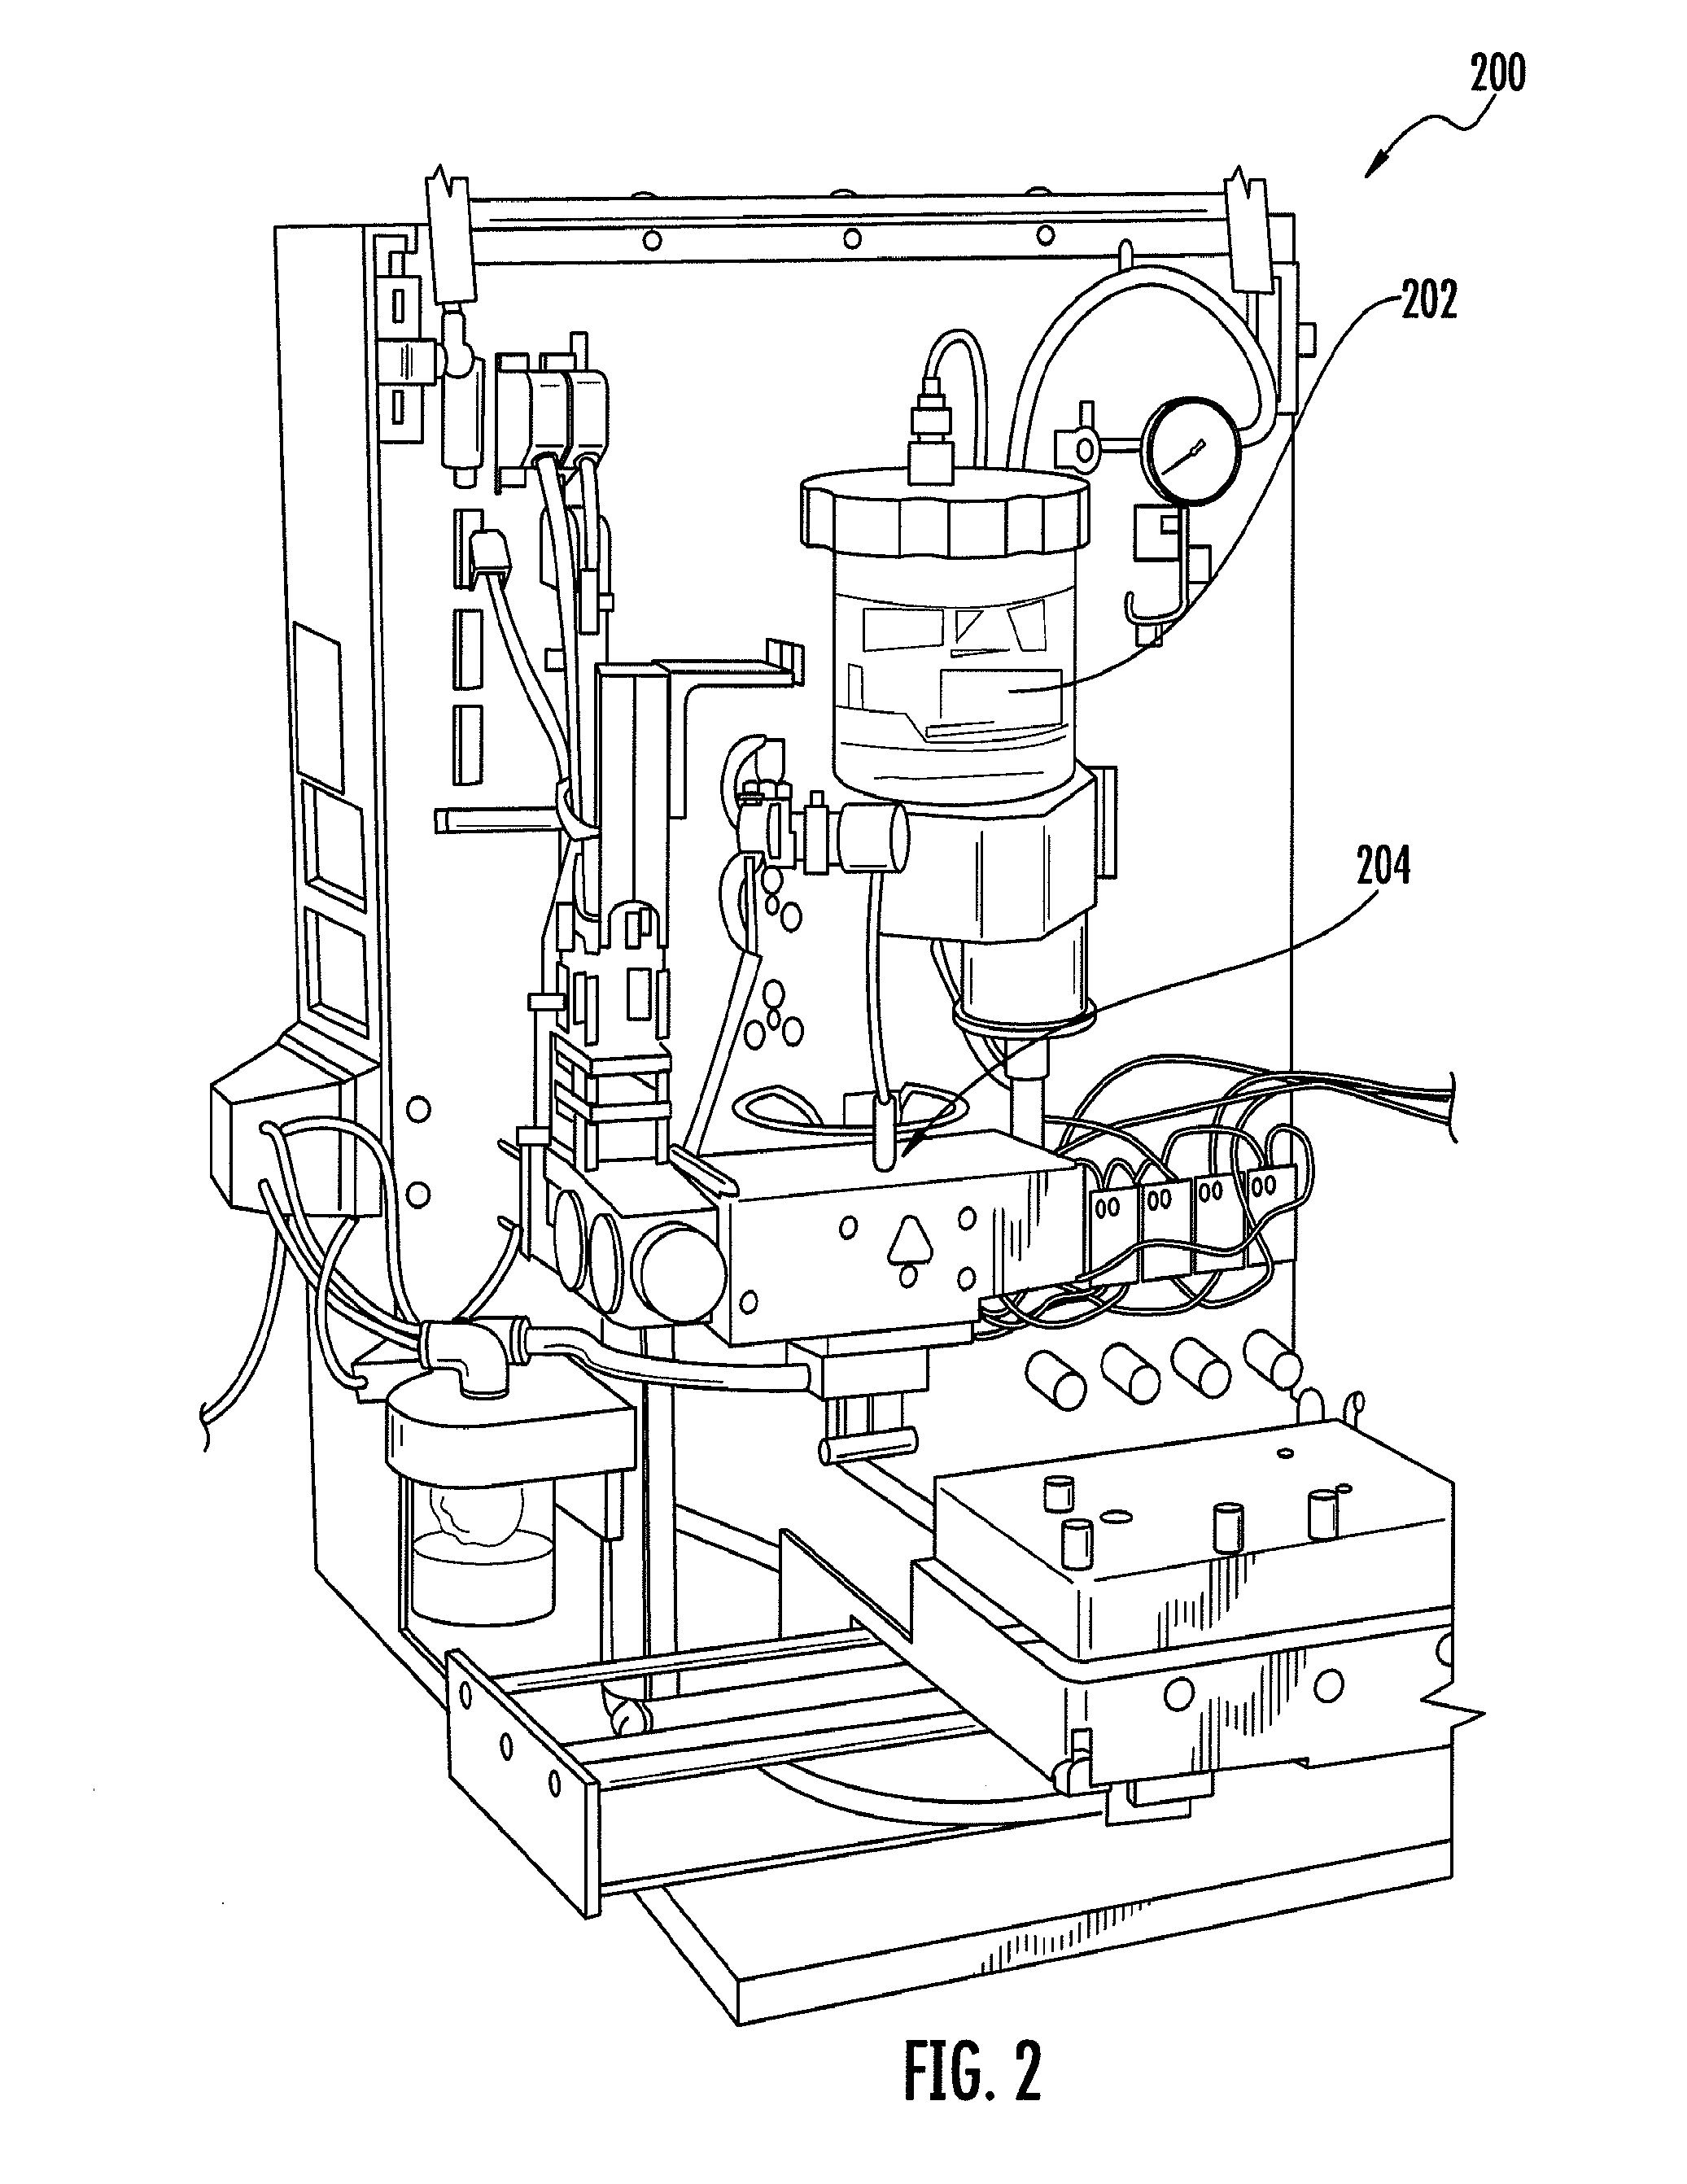 Apparatuses and Methods for Evaluating and Sorting Pollen and Plants